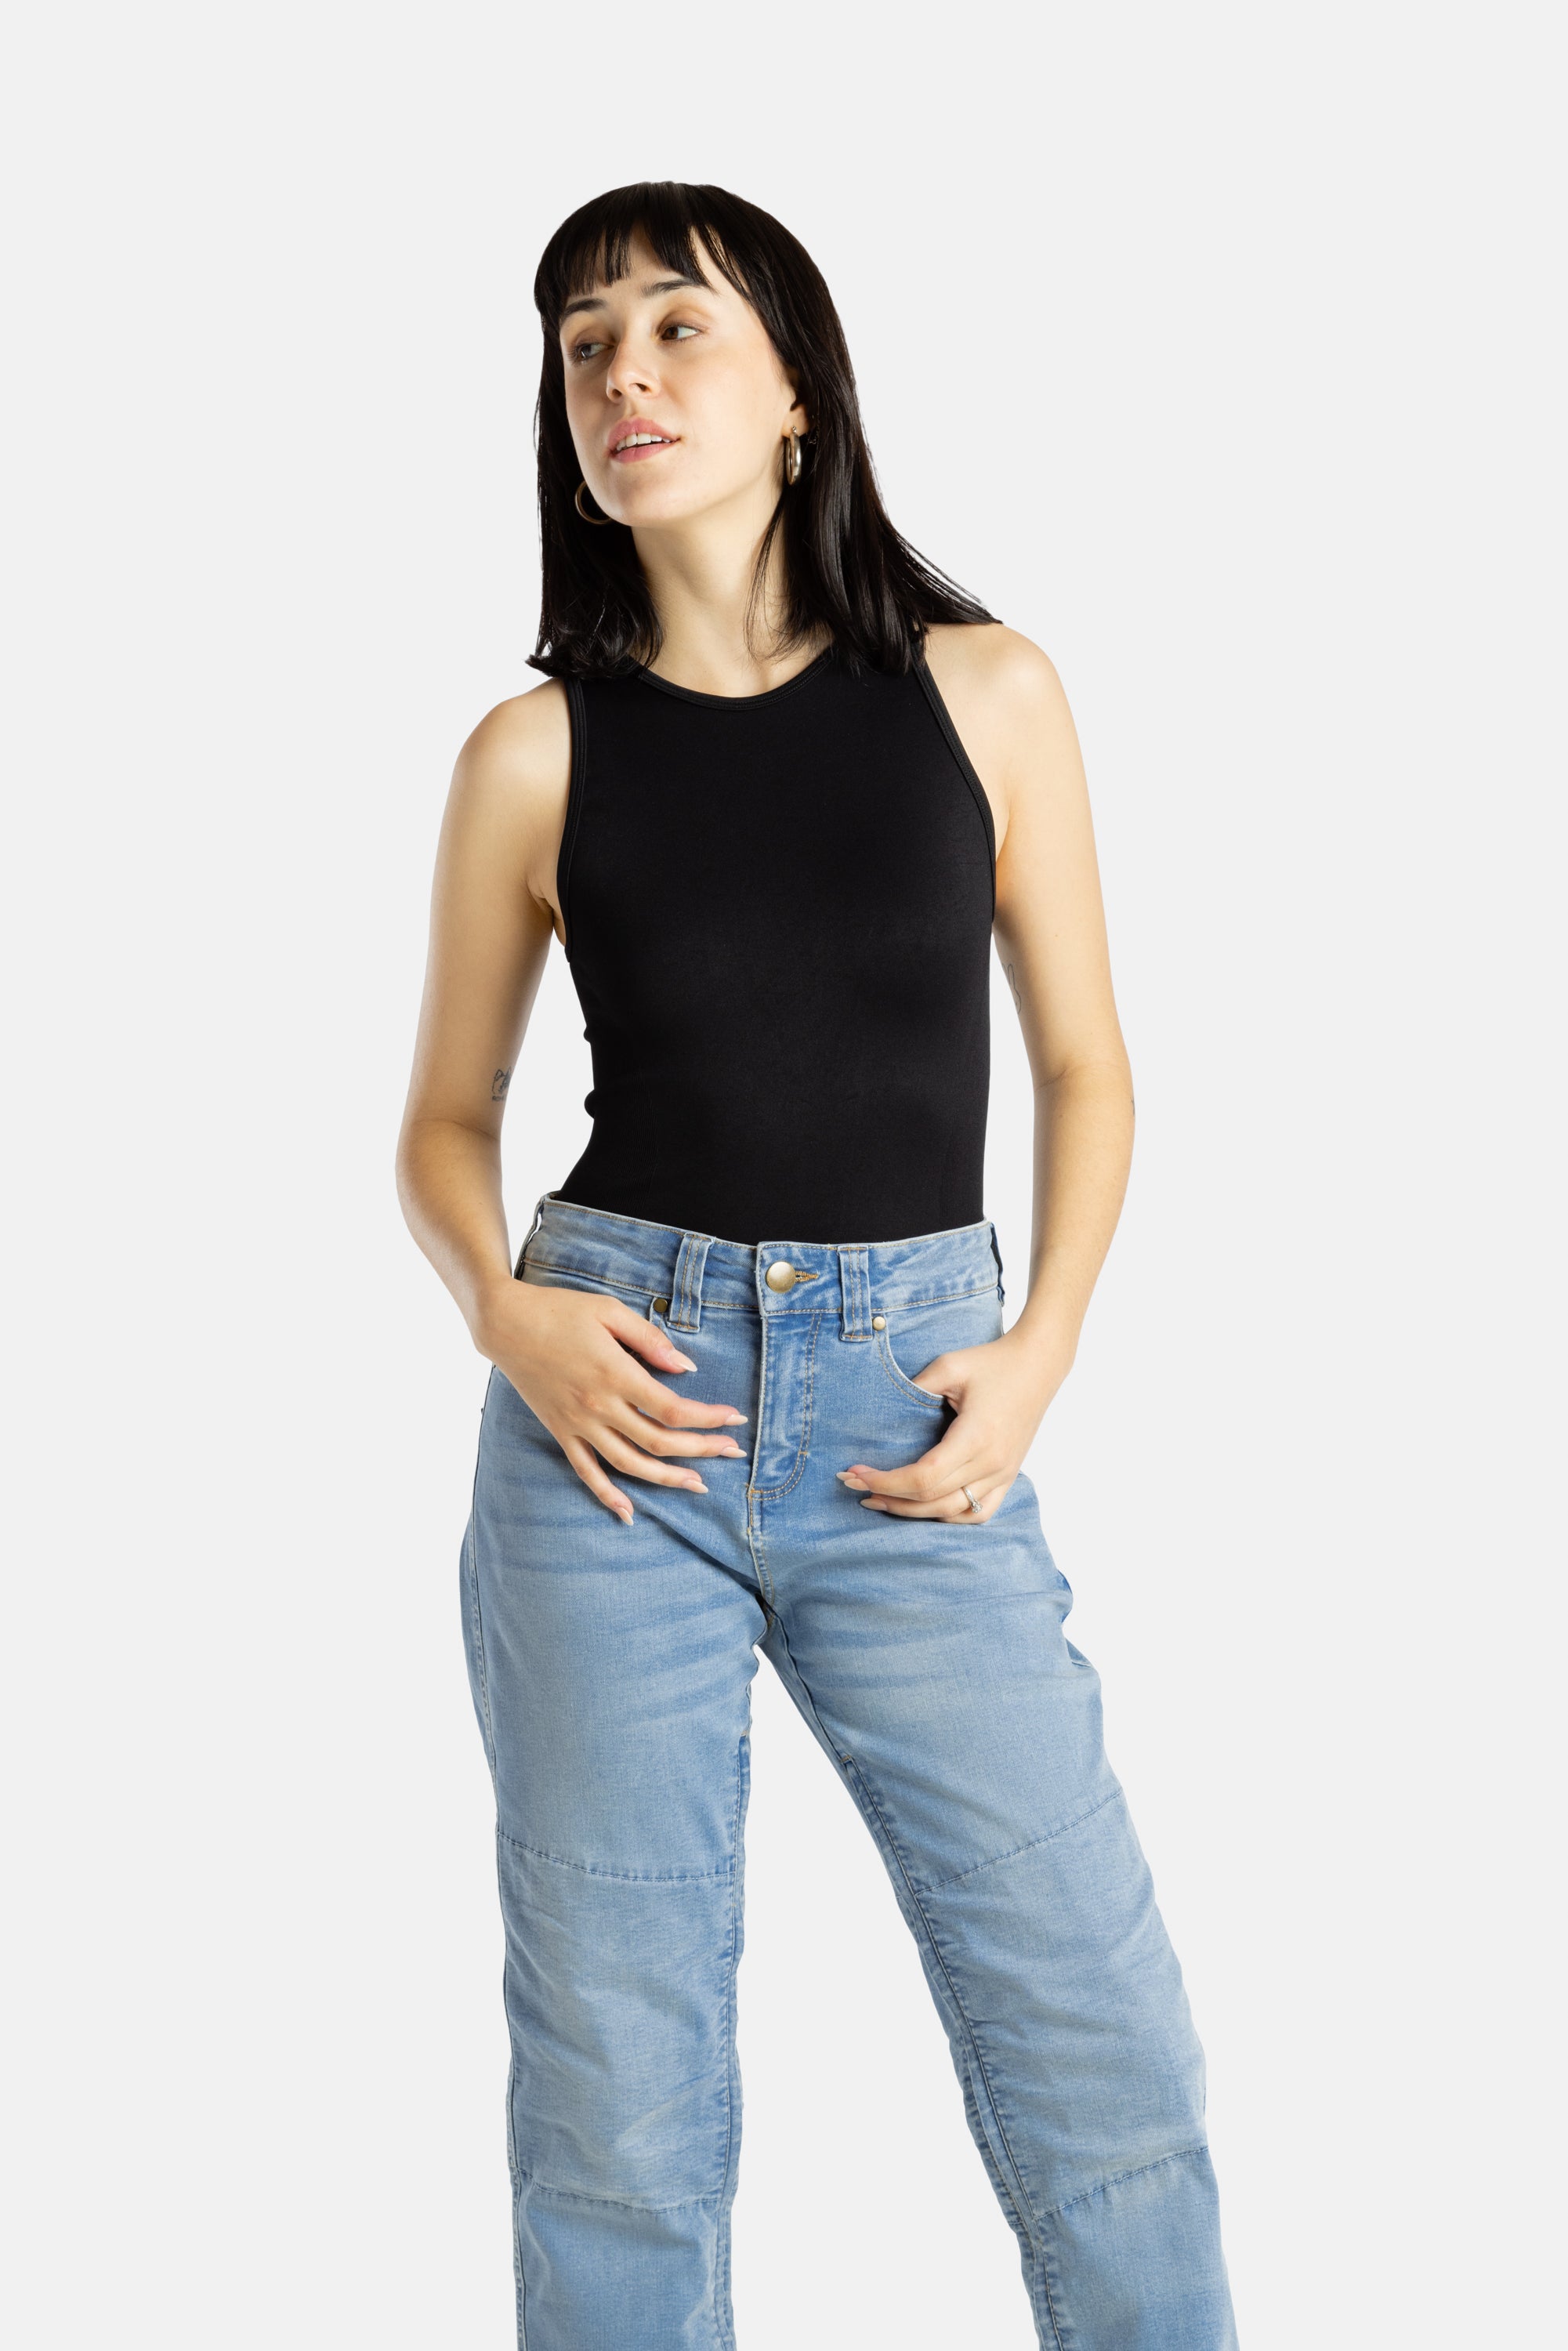 A white woman with long black hair and hoop earrings wears a black tank top and denim jeans.